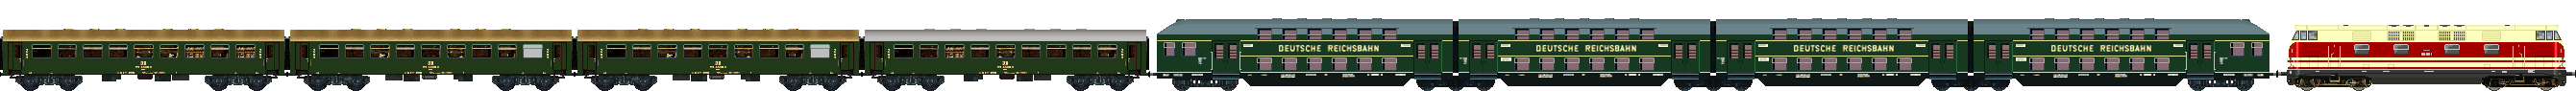 DR 118 with train from DBv and Reko four axle coaches